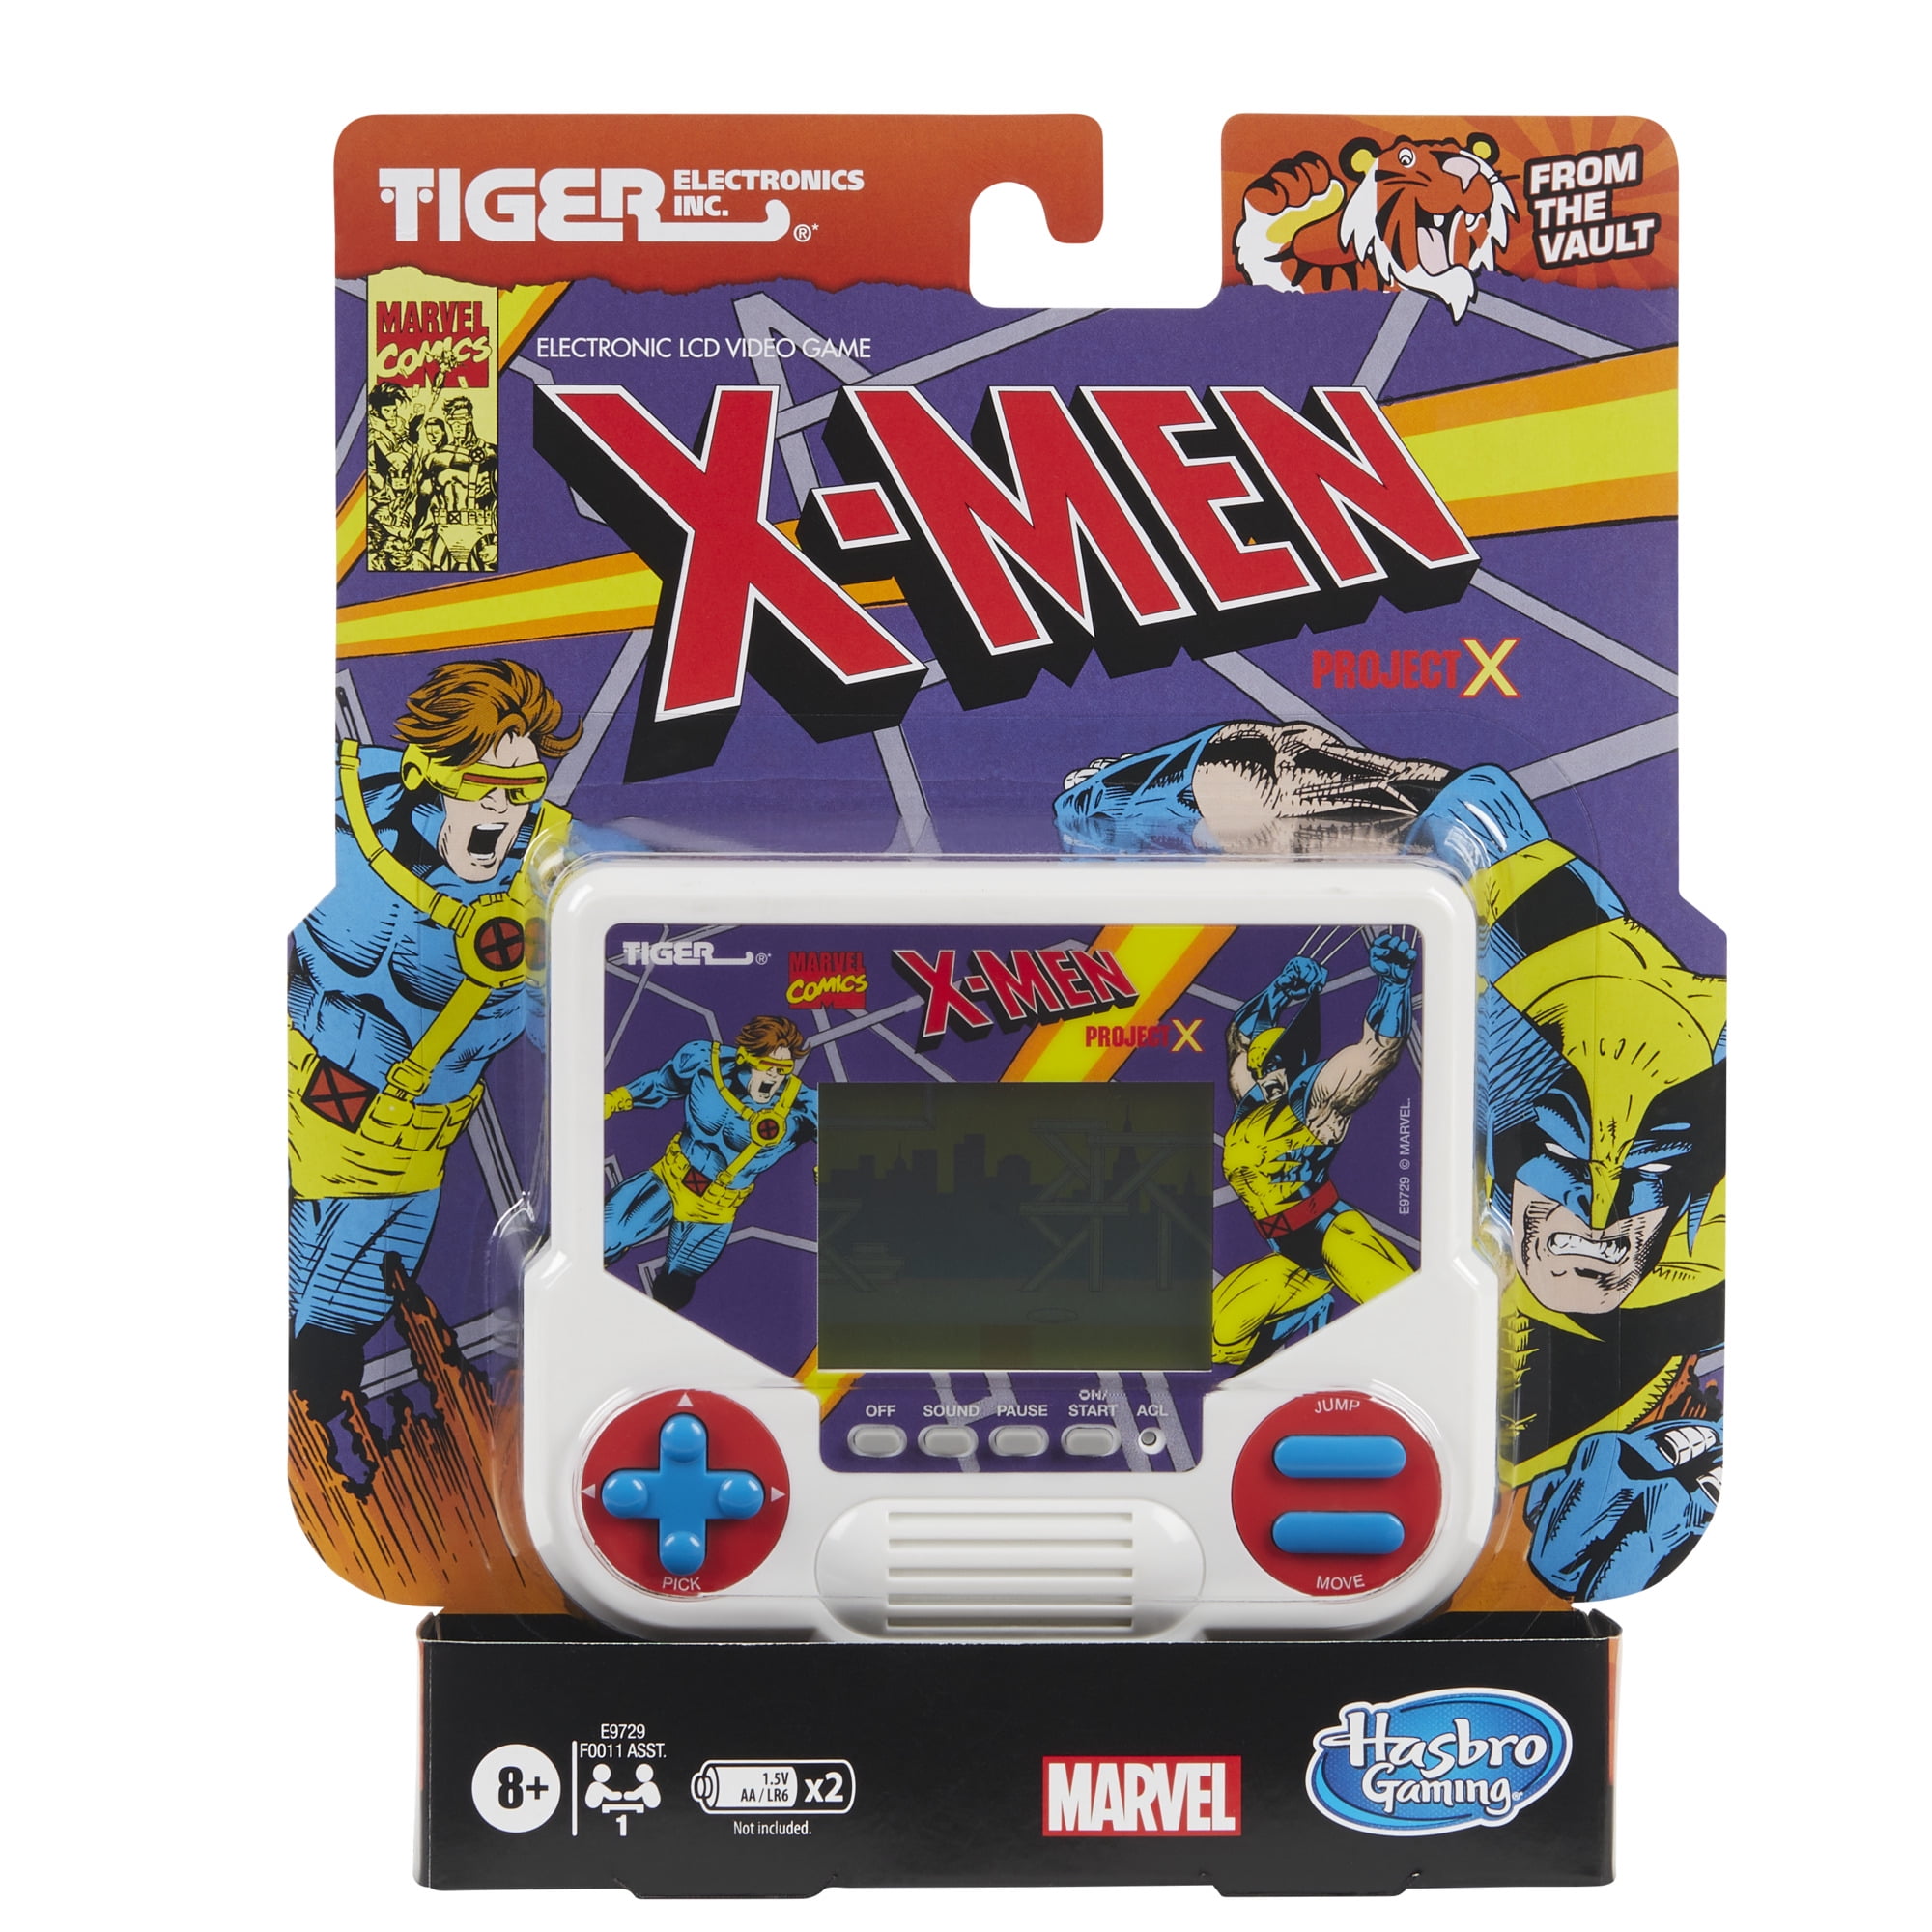 Ages 8 and Up Tiger Electronics Marvel Spider-Man Electronic LCD Video Game Retro-Inspired 1-Player Handheld Game 